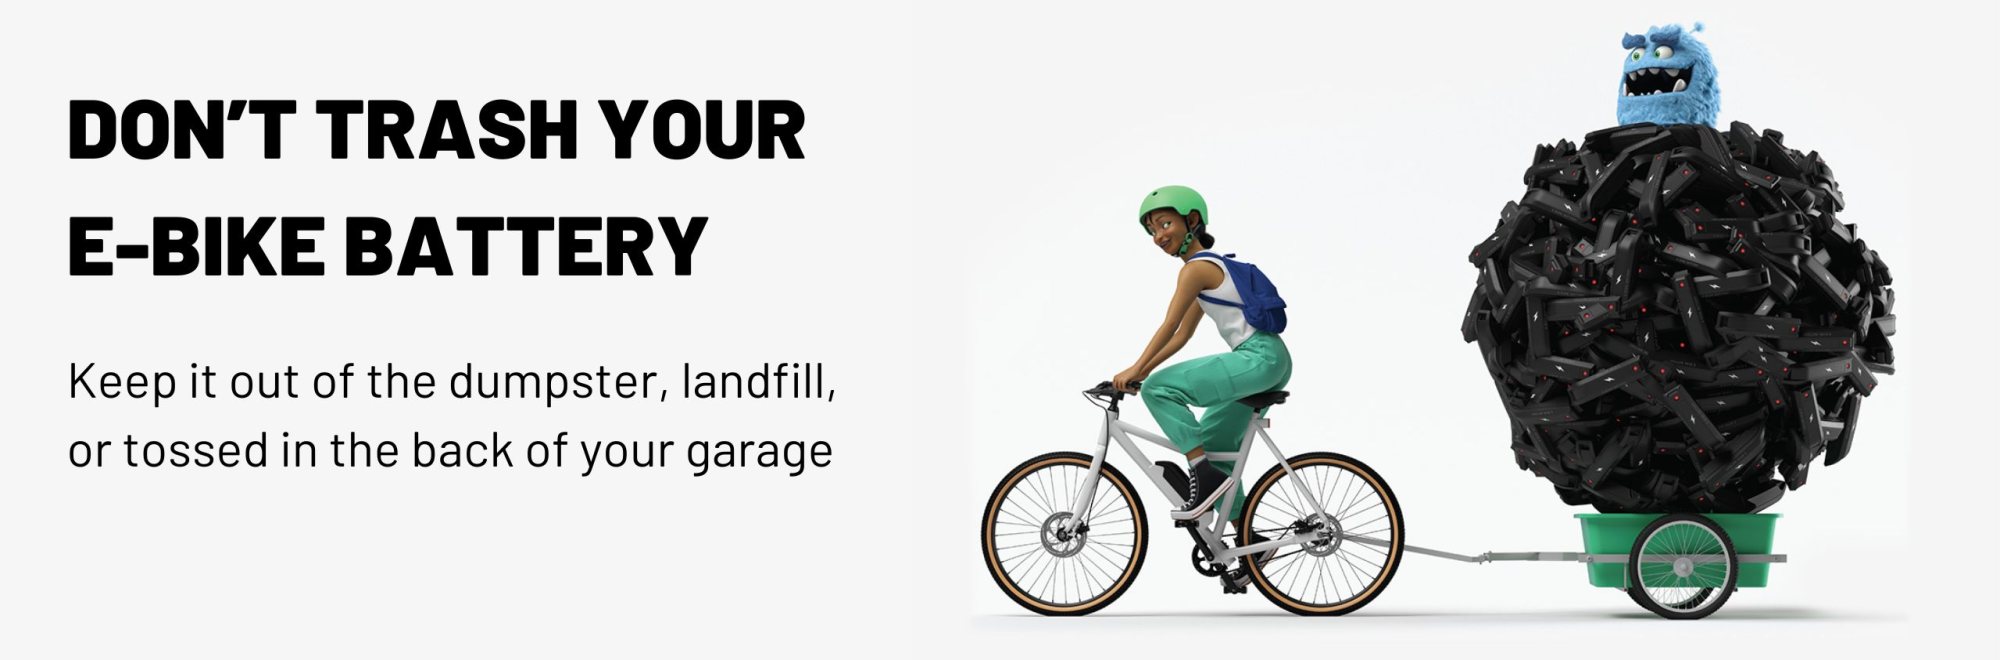 DON’T TRASH YOUR E-BIKE BATTERY Keep it out of the dumpster, landfill, or tossed in the back of your garage.